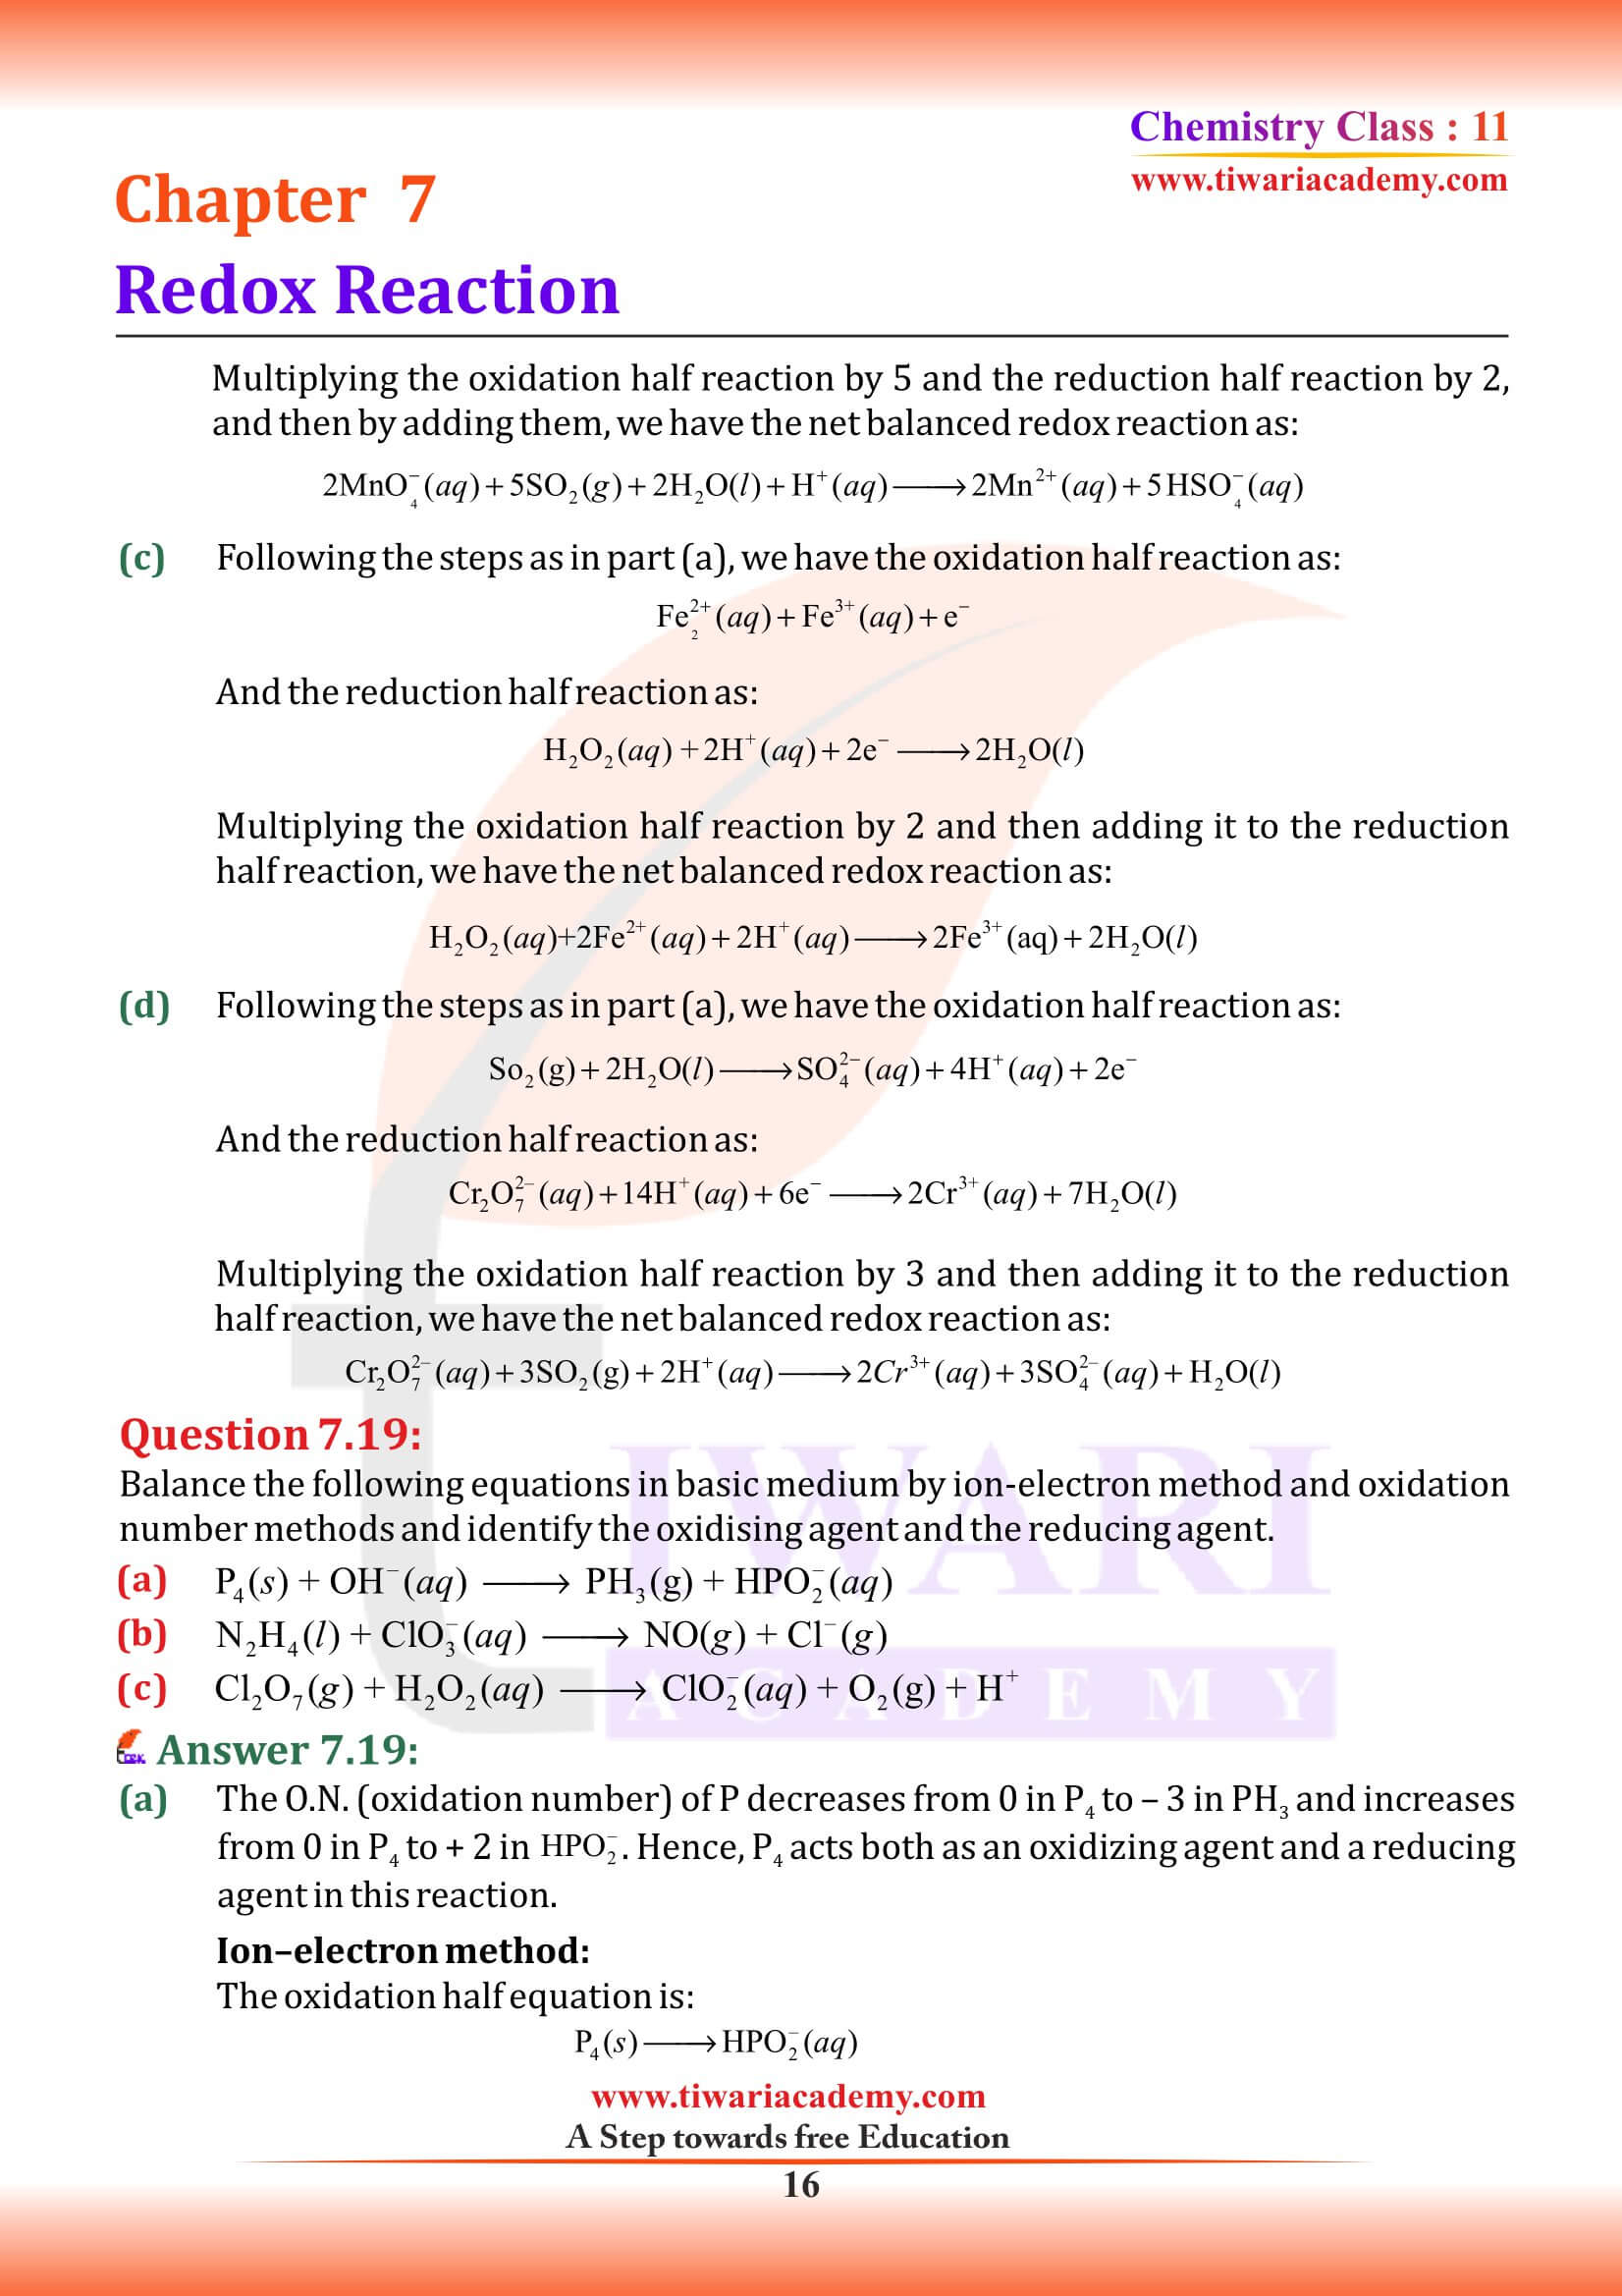 NCERT Class 11 Chemistry Chapter 7 free